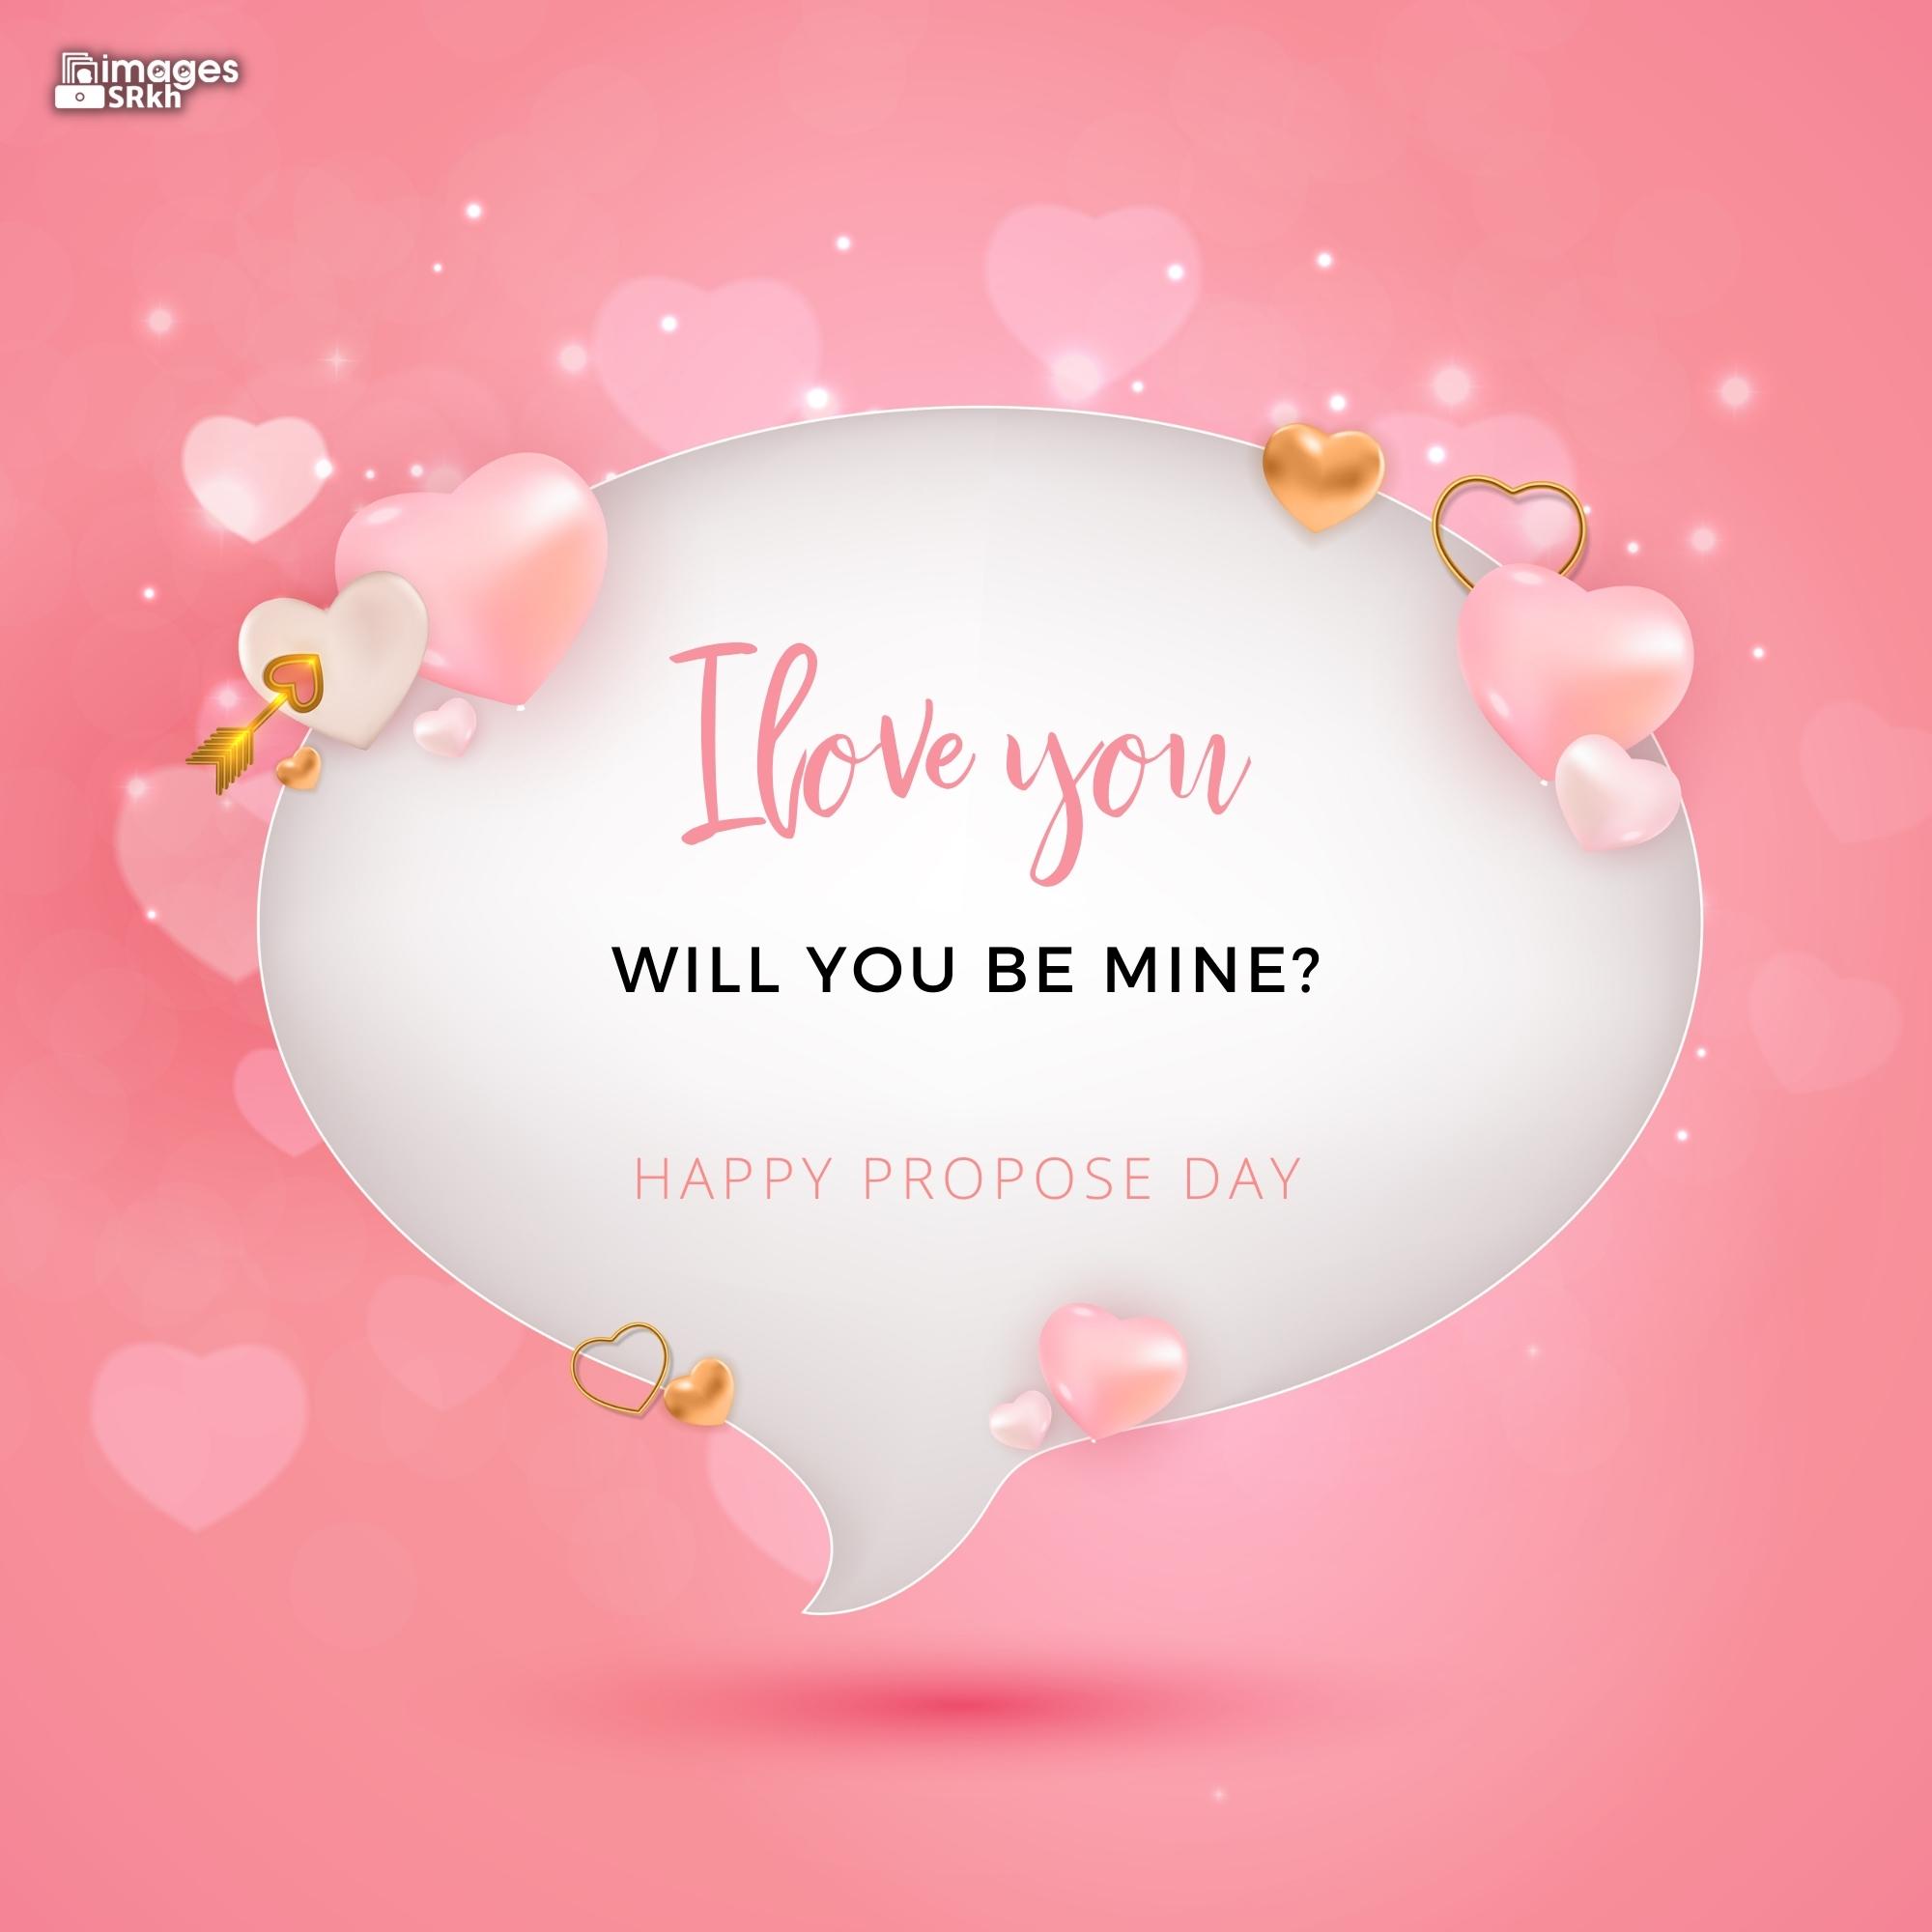 Happy Propose Day Images | 445 | I love you will you be mine